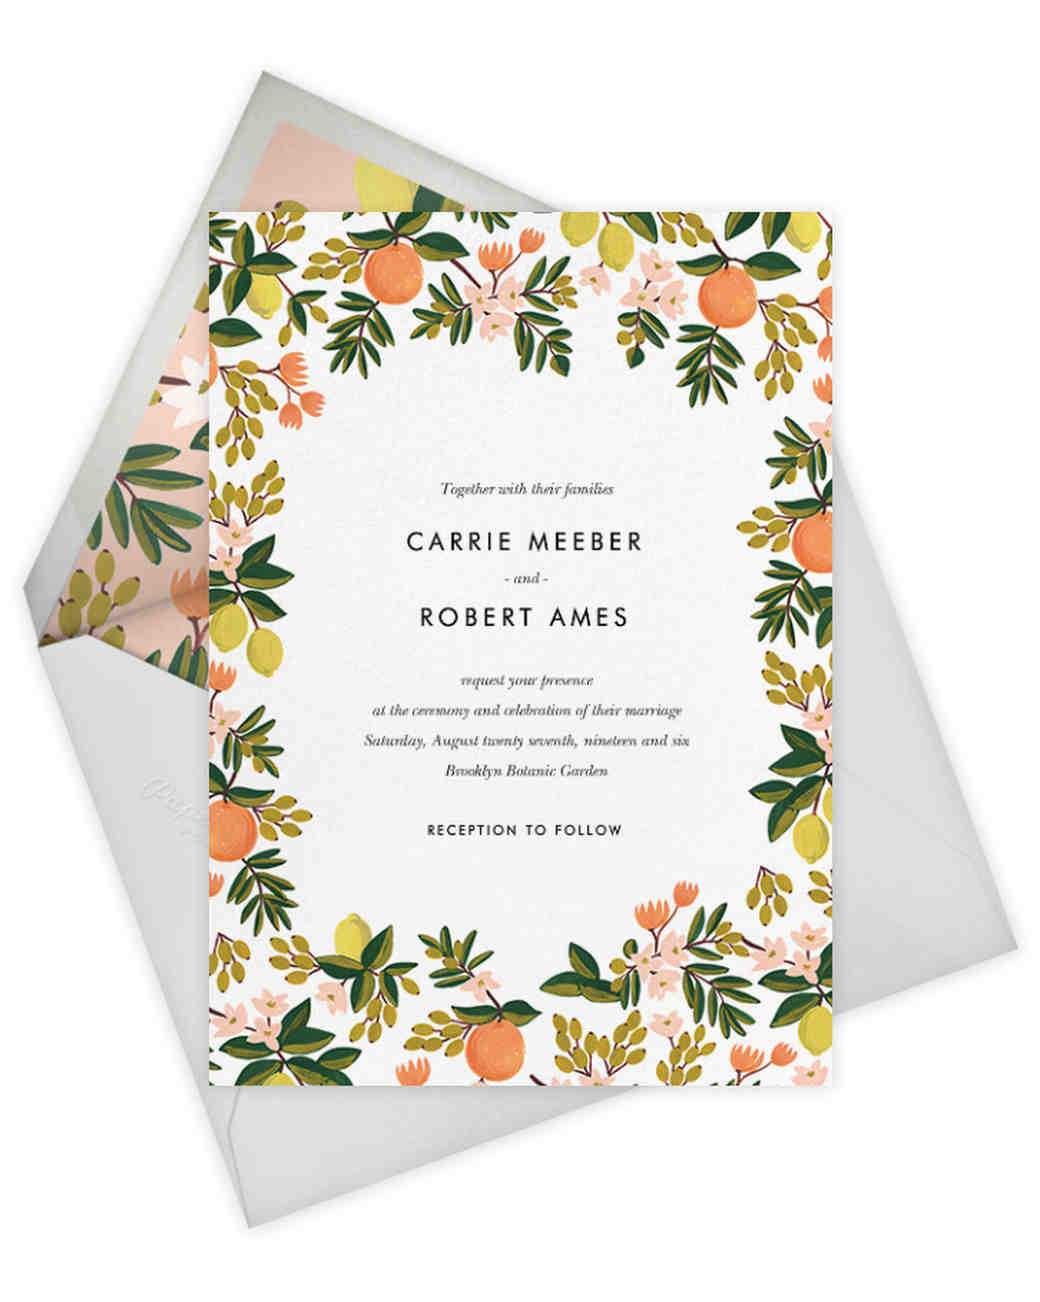 Paperless Wedding Invitations
 Must See Check Out Rifle Paper Co s New Paperless Post